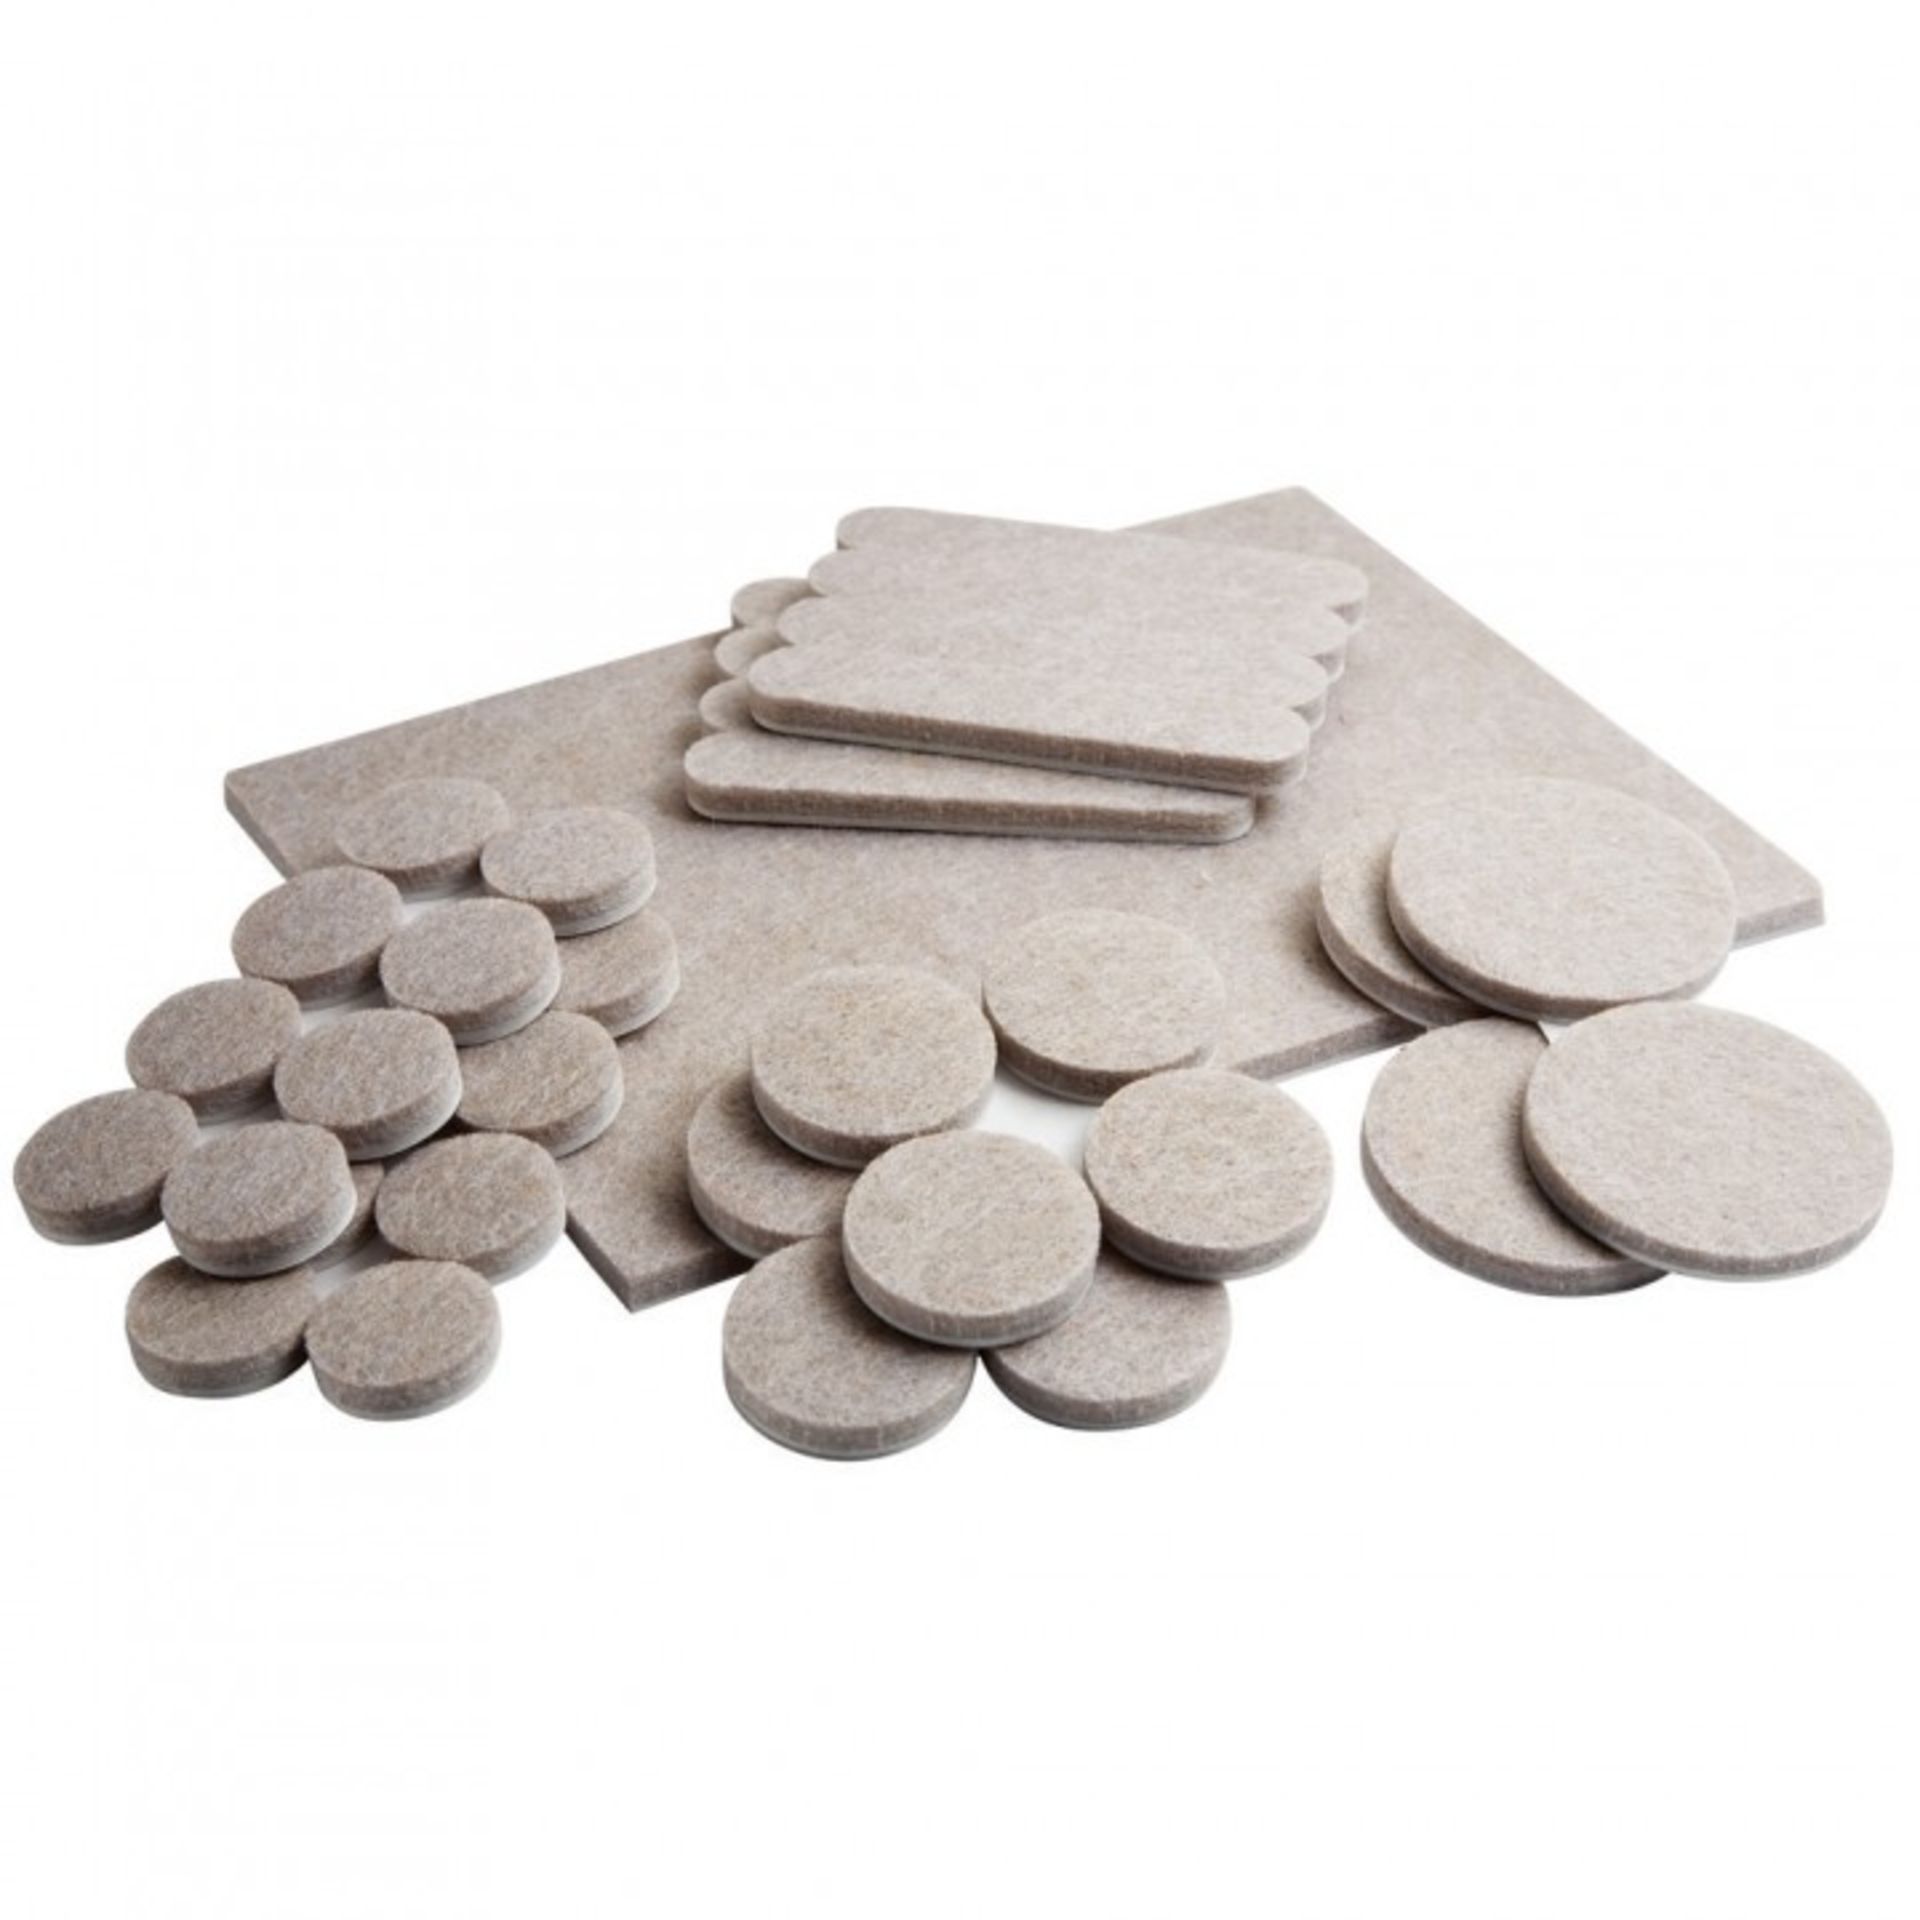 V Brand New 33 Piece Self Adhesive Felt Pad Set Includes 1 of 152x114 mm, 8 of 66x12 mm, 12 of 19 mm